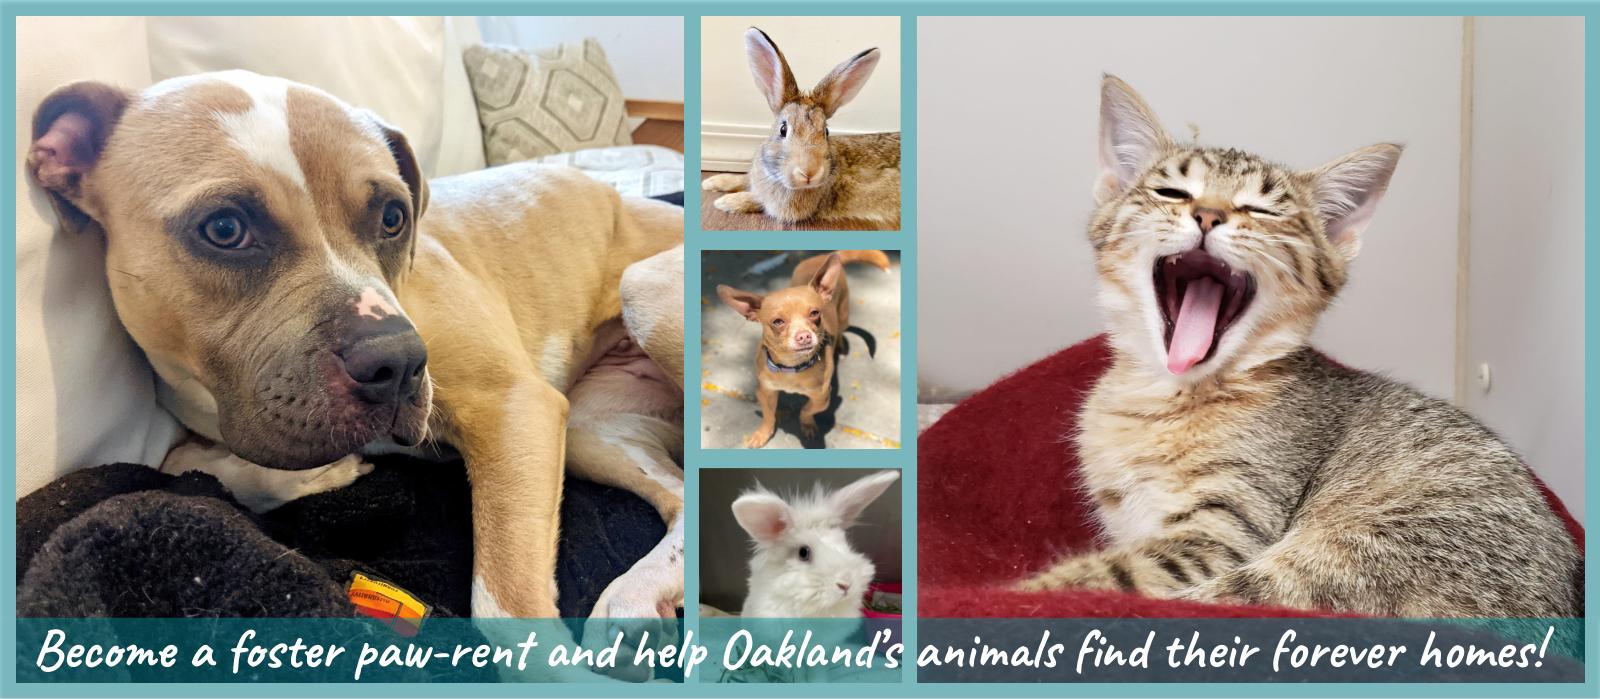 Oakland Animal Services – Oakland's only open admissions shelter